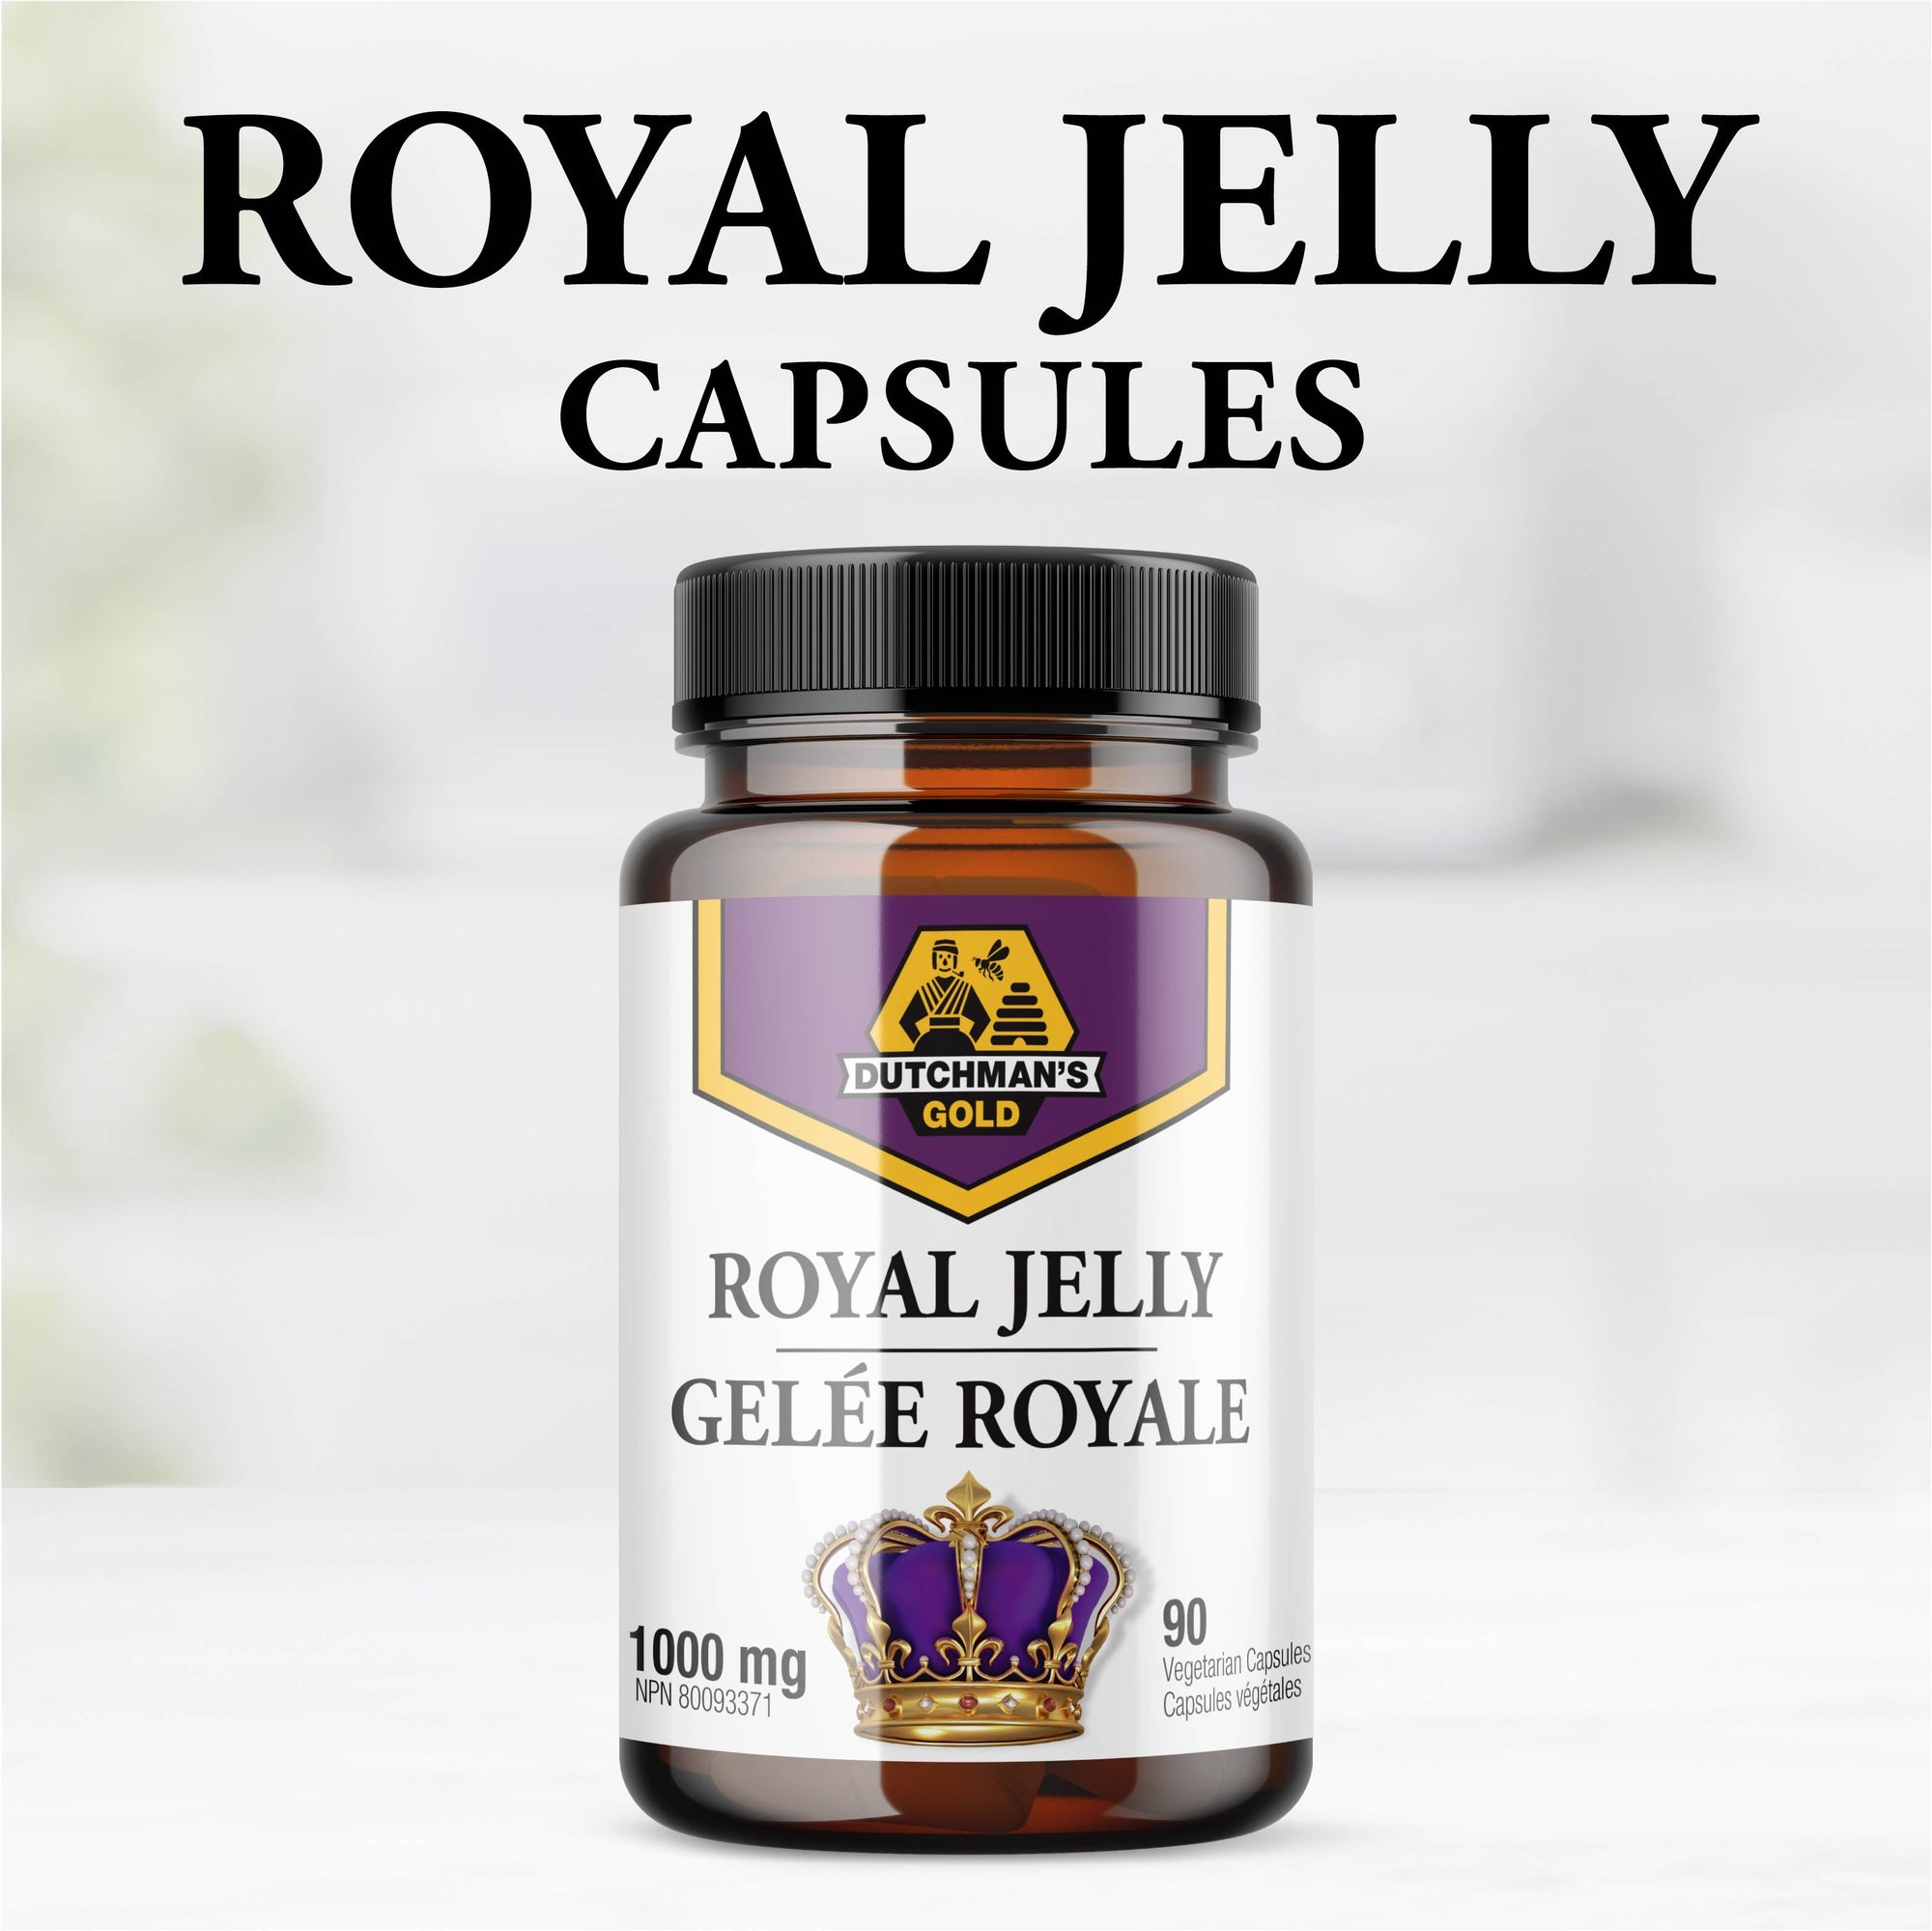 Products - Royal jelly